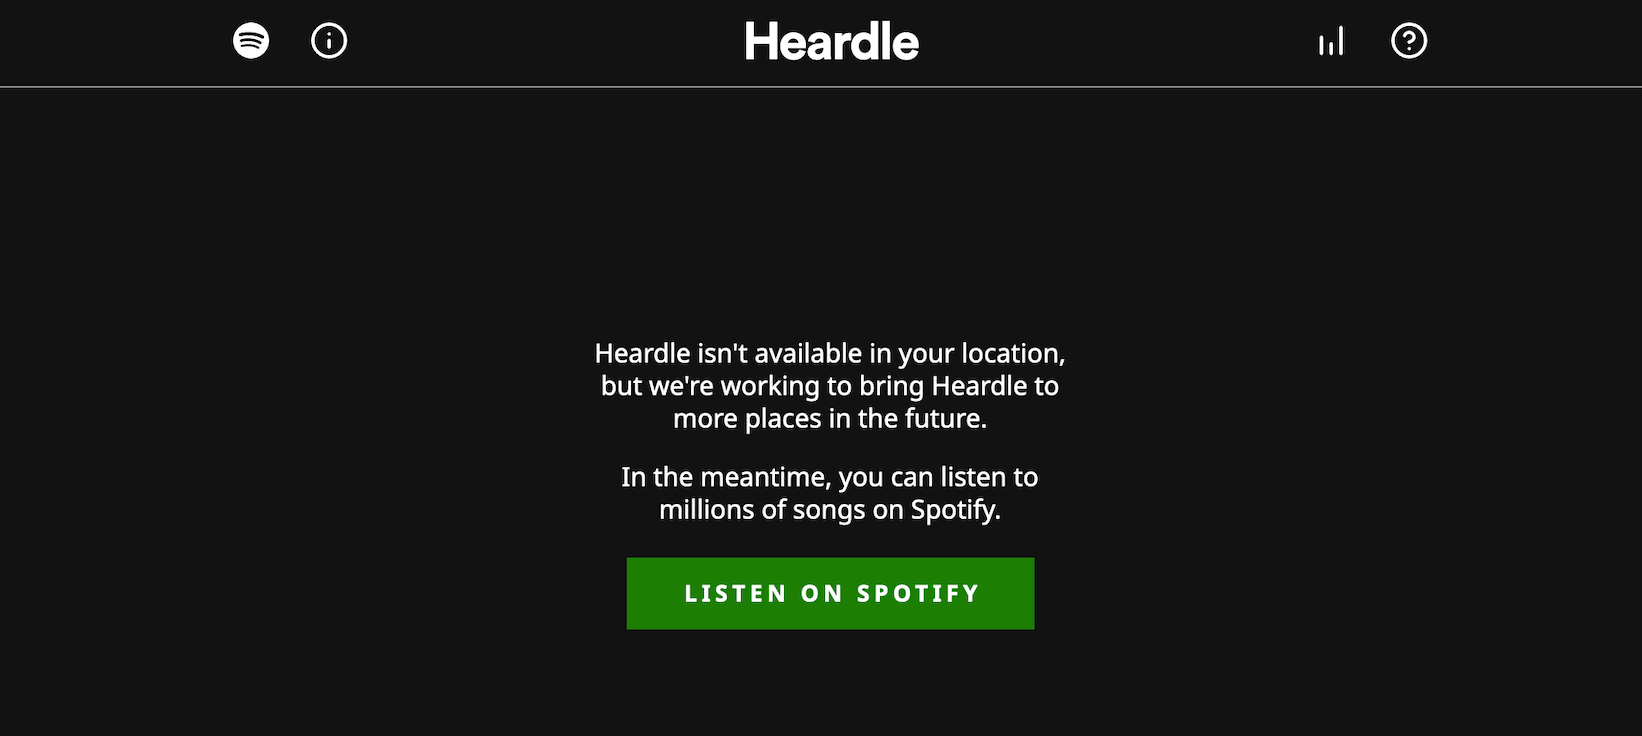 Heardle isn't available in your location